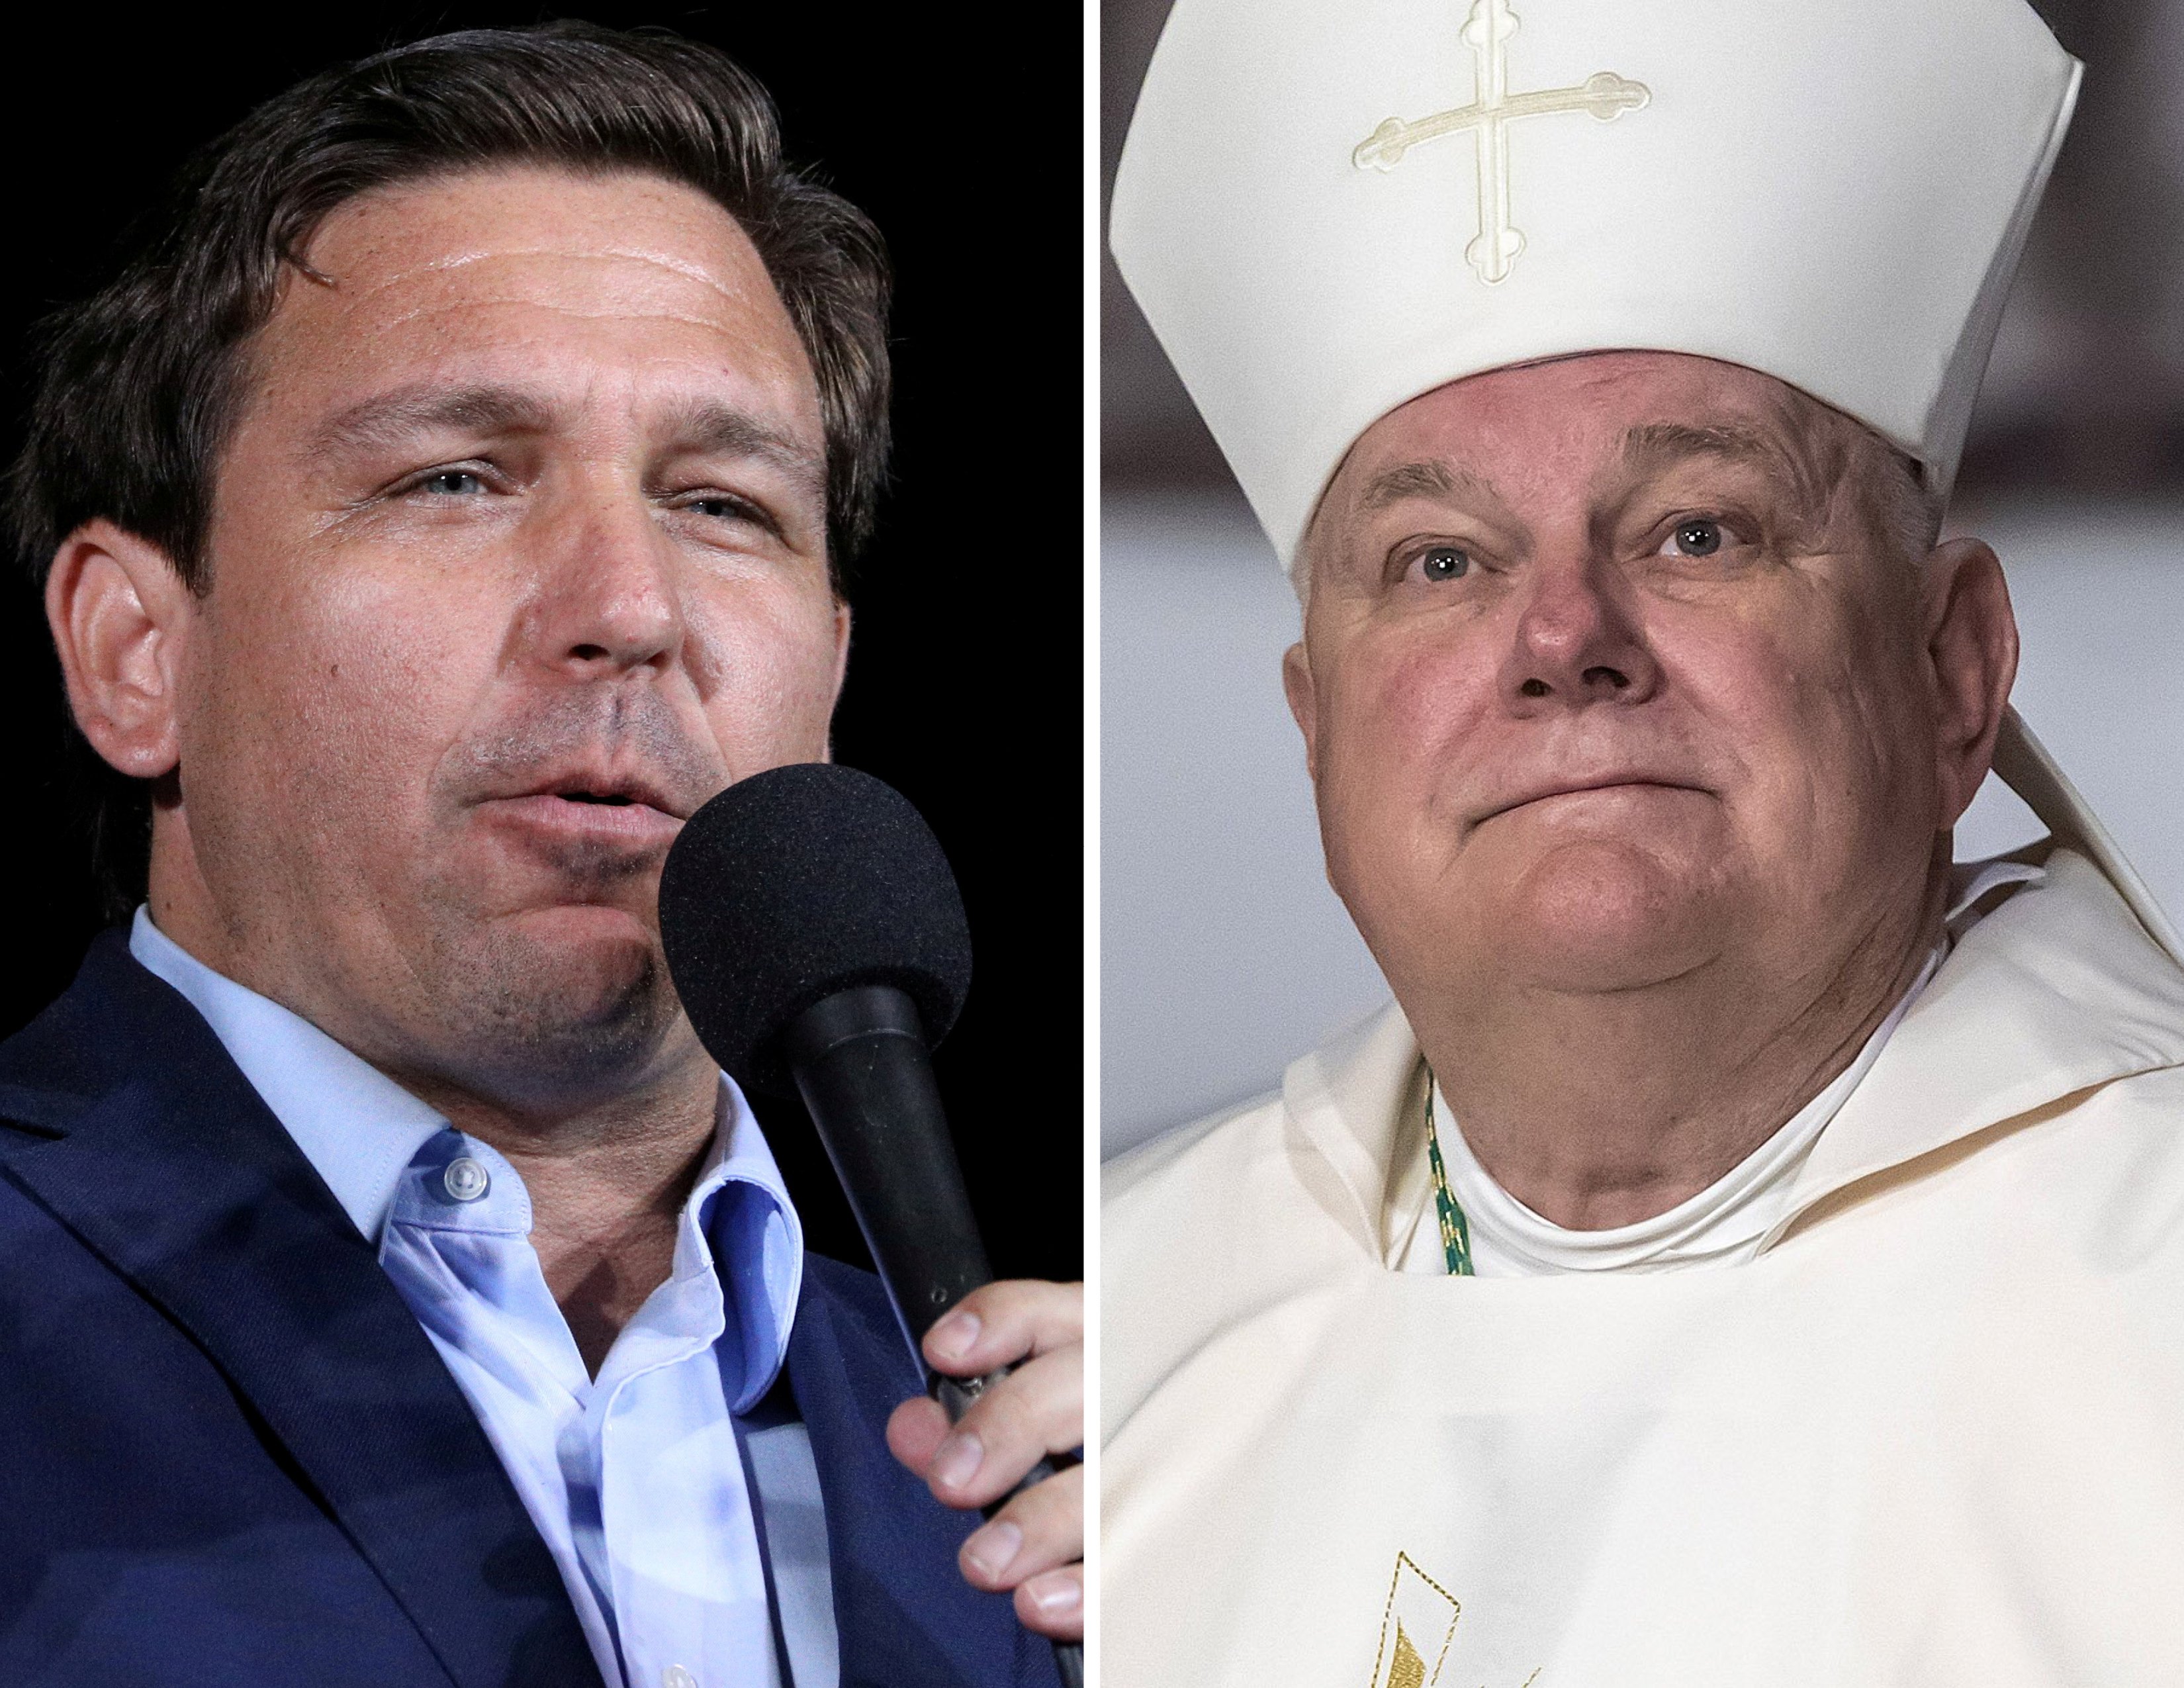 Florida Gov. Ron Desantis and Archbishop Thomas G. Wenski of Miami are seen in this composite photo. (CNS composite; photos by Tom Brenner, Reuters; Stefano Dal Pozzolo)